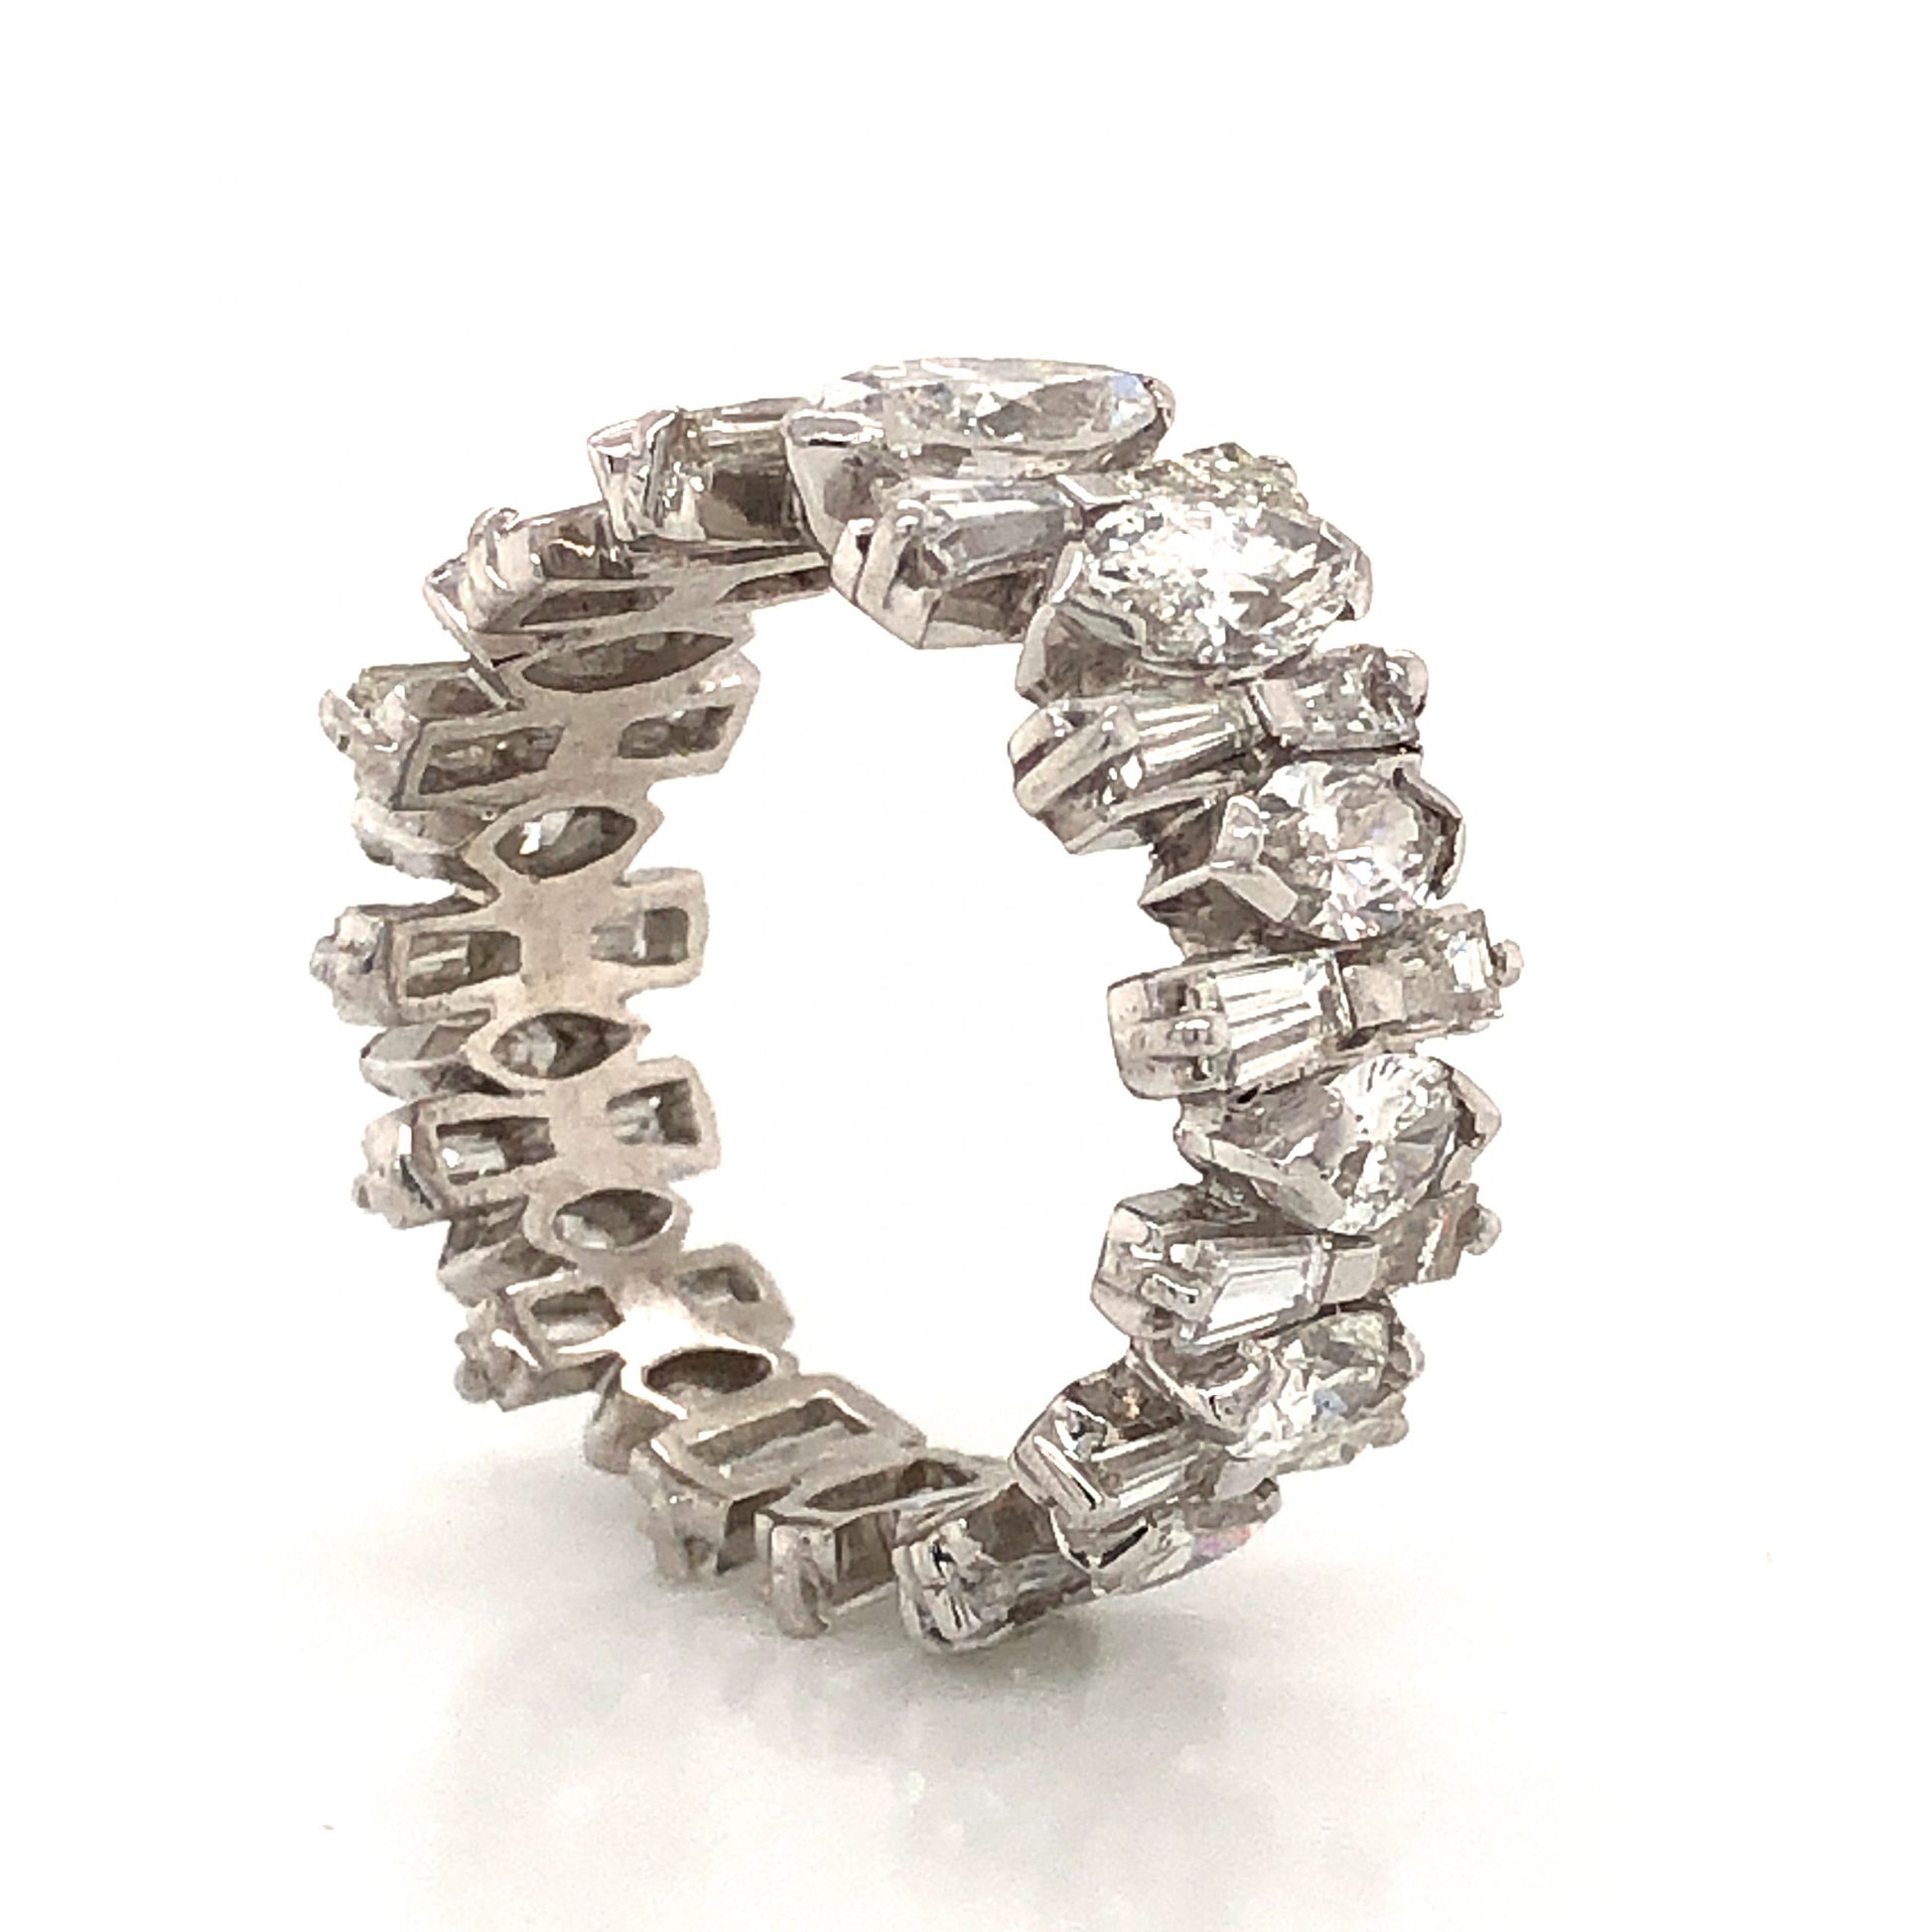 Marquise & Baguette Cut Diamond Eternity Ring in PlatinumComposition: PlatinumRing Size: 7Total Diamond Weight: 5.05 ctTotal Gram Weight: 9.5 g